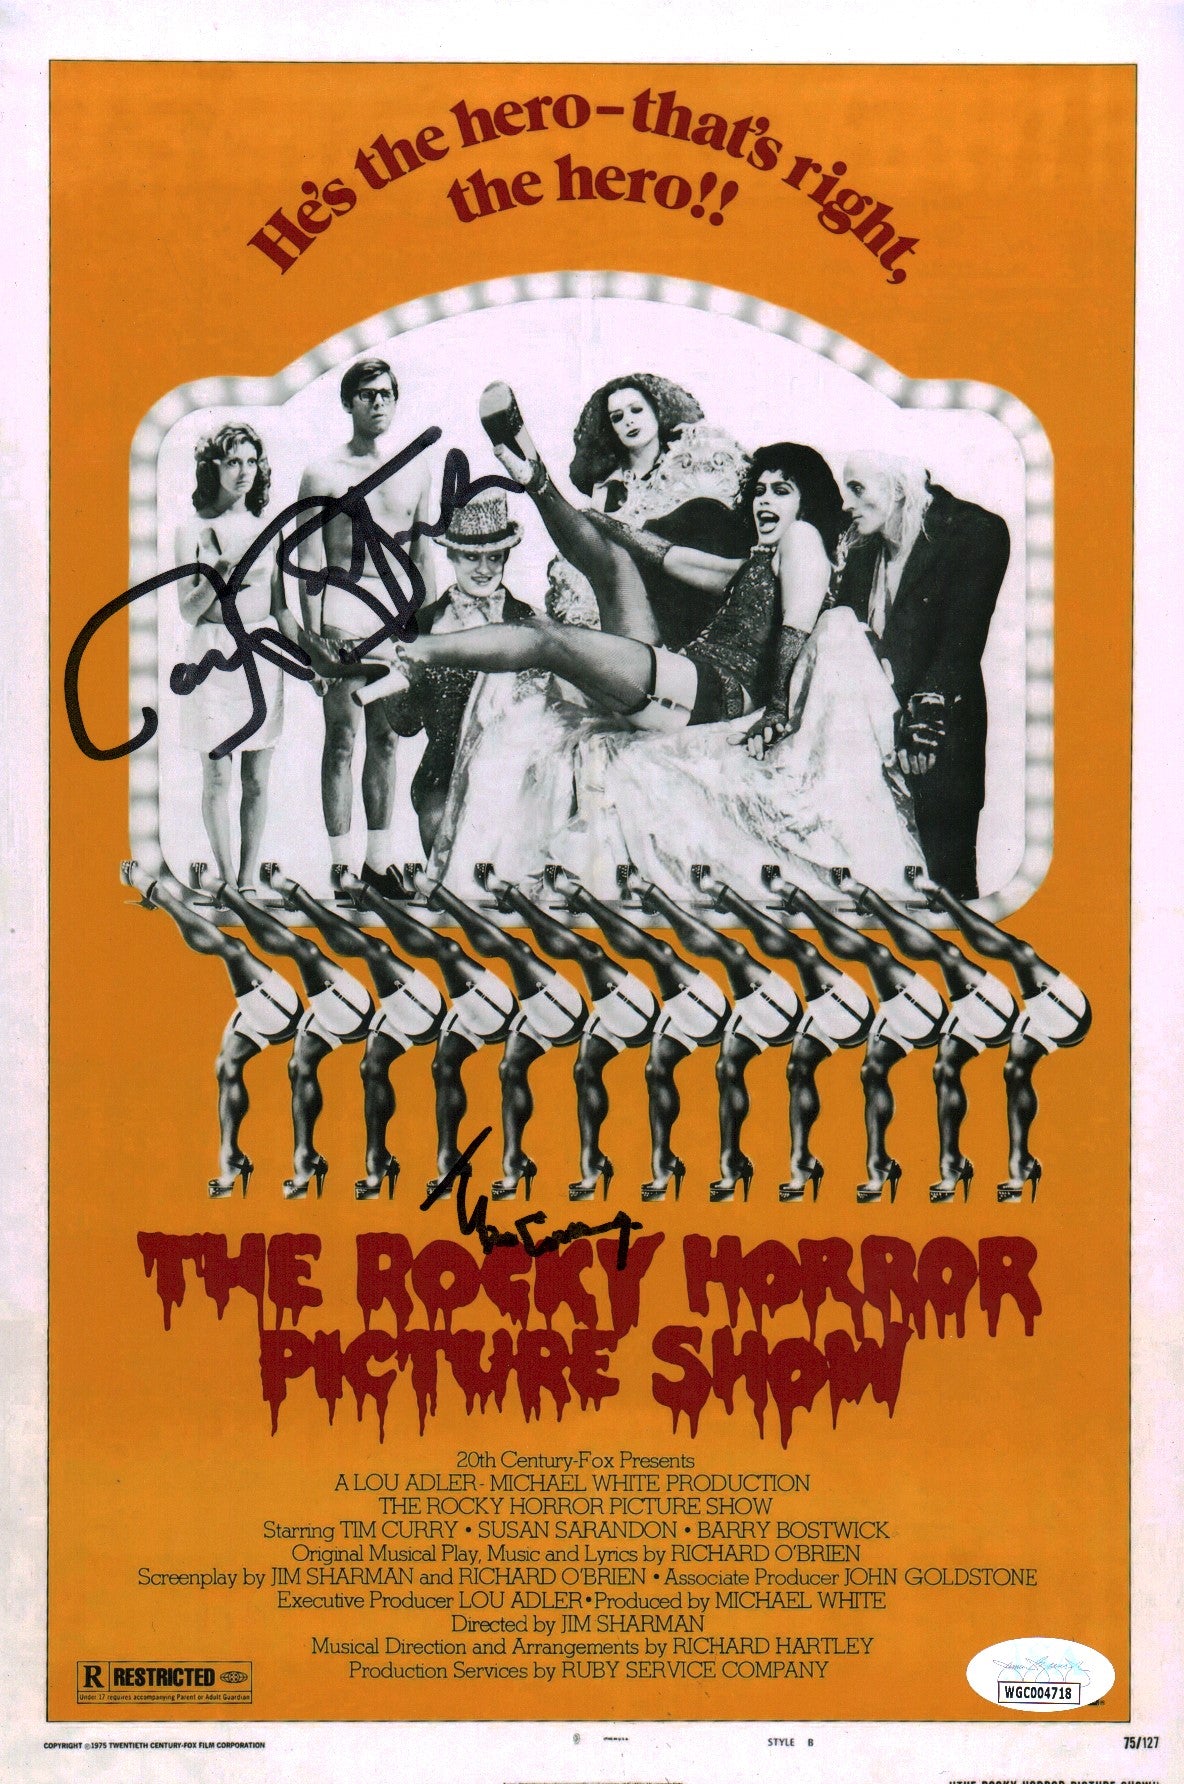 The Rocky Horror Picture Show RHPS 8x12 Cast Curry Bostwick Signed Photo JSA Certified Autograph